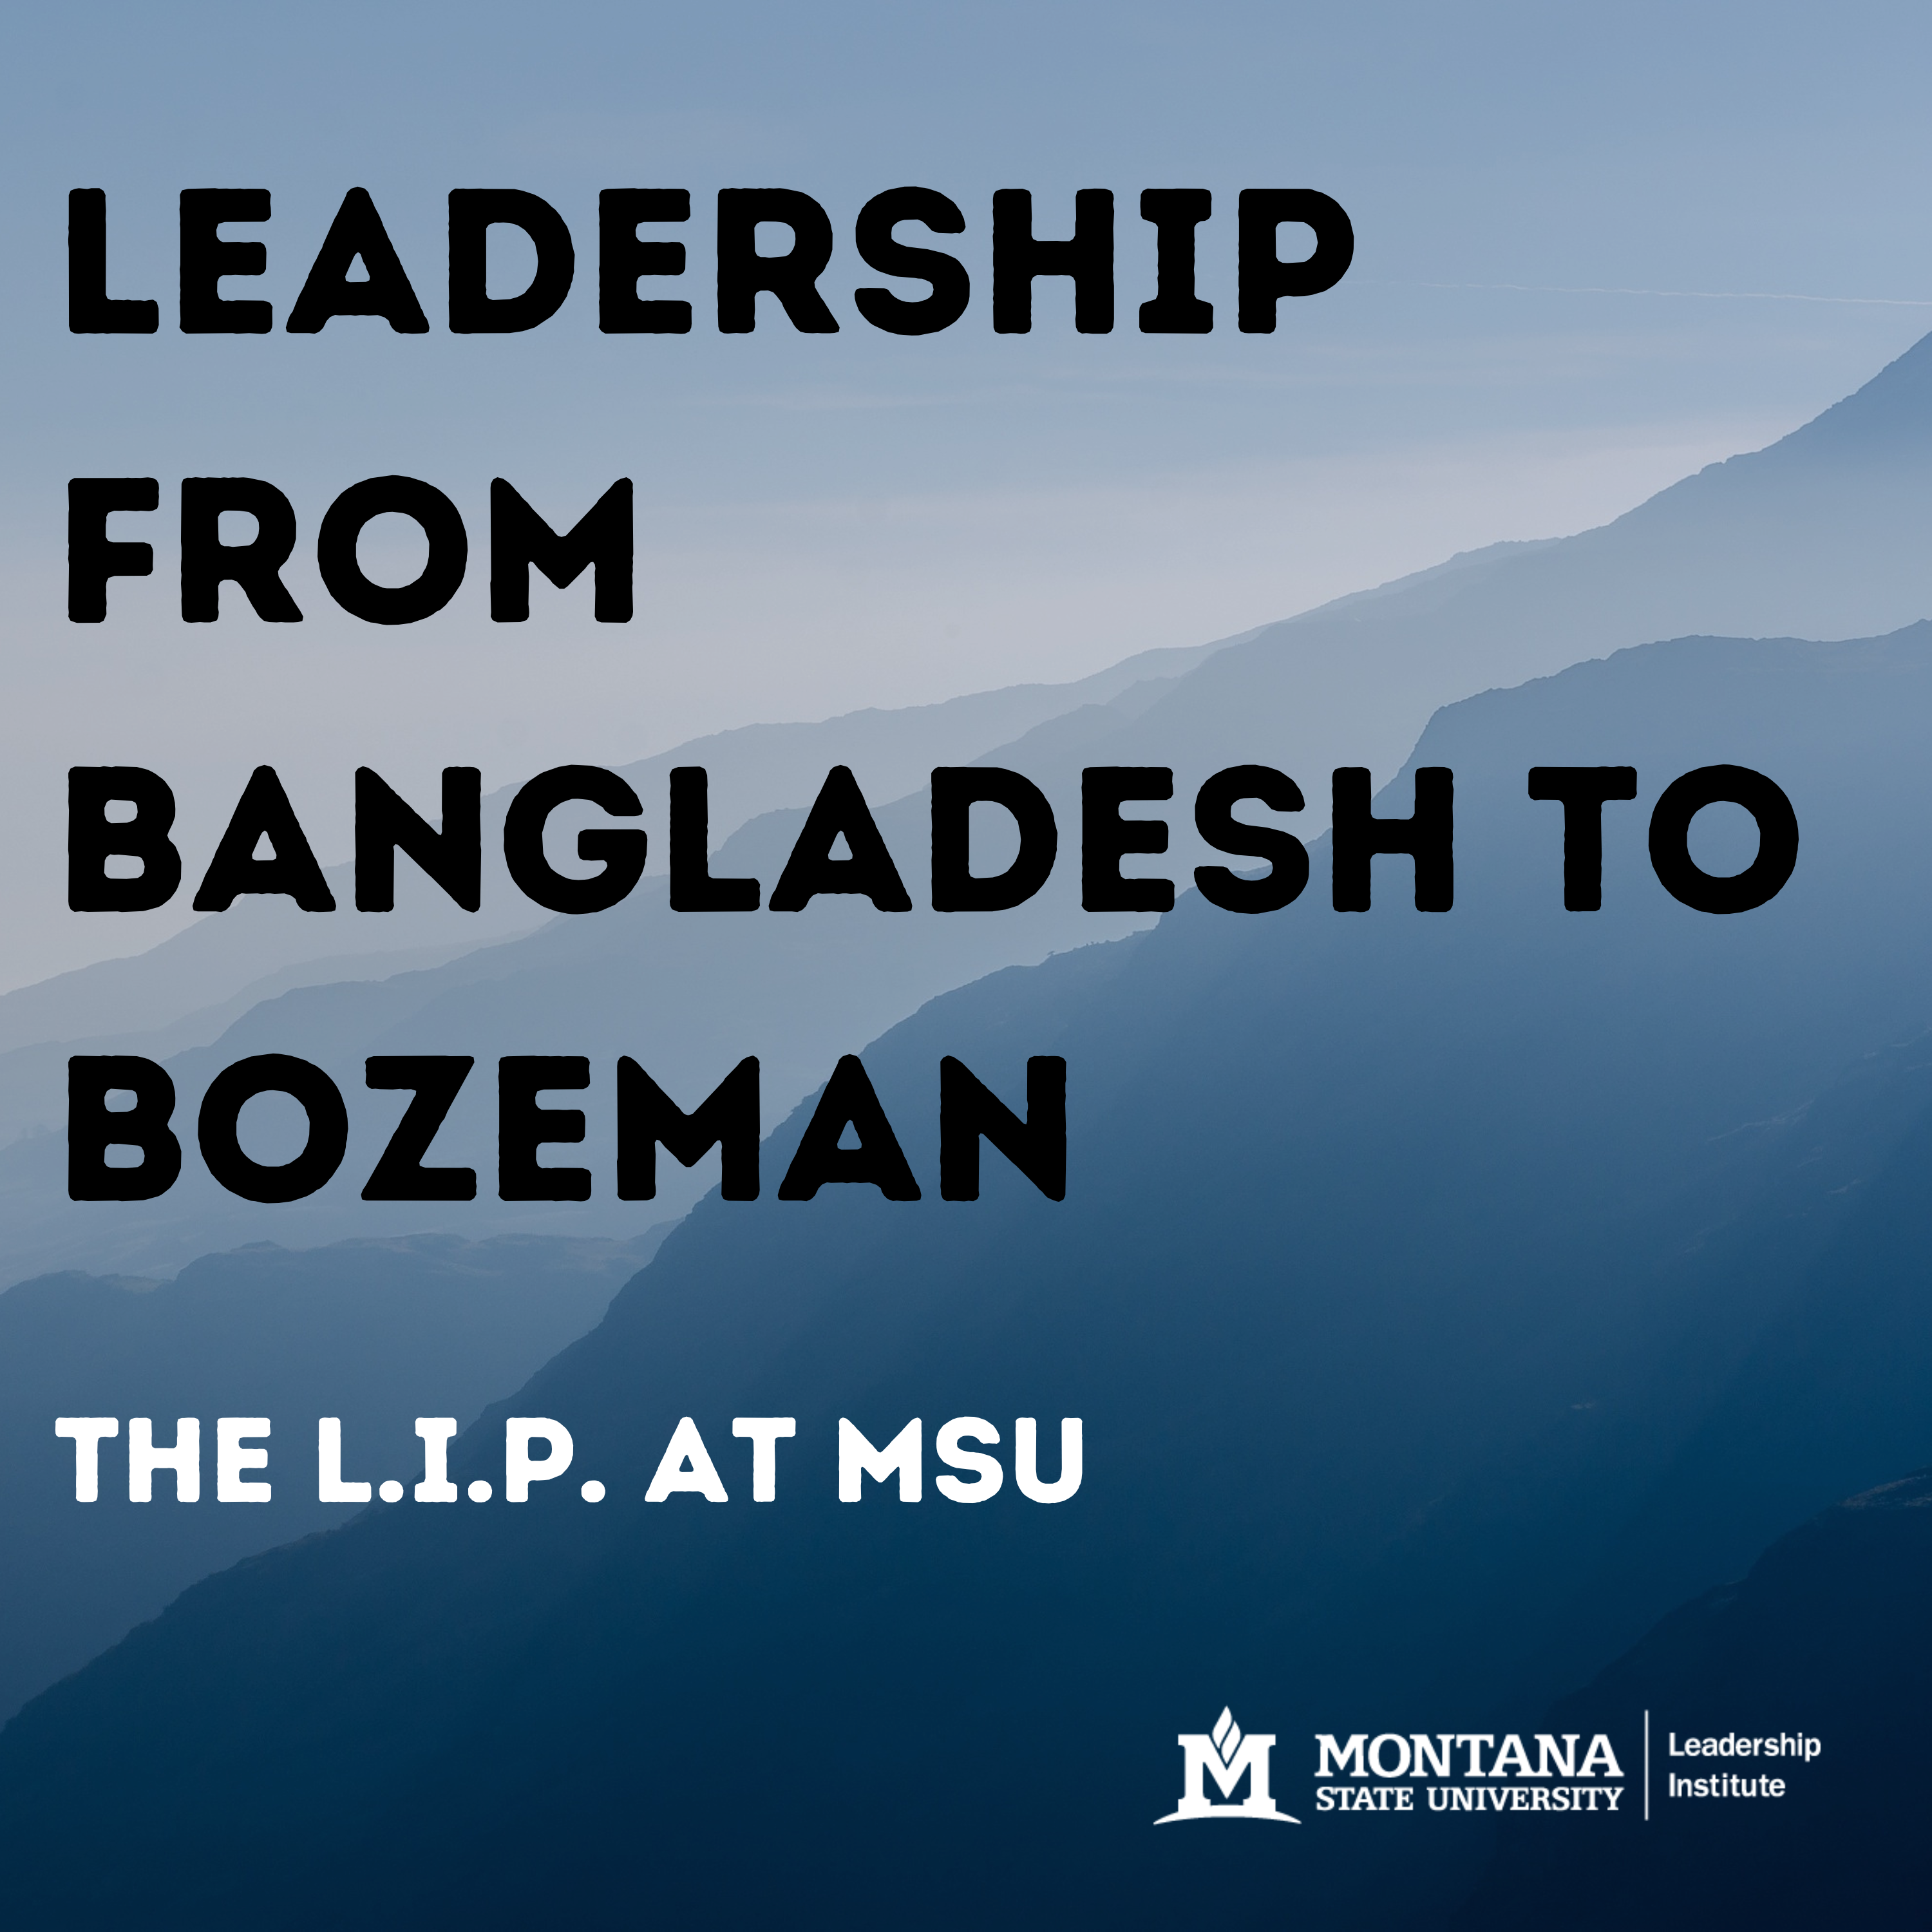 Black text on a blue background: Leadership From Bangladesh to Bozeman